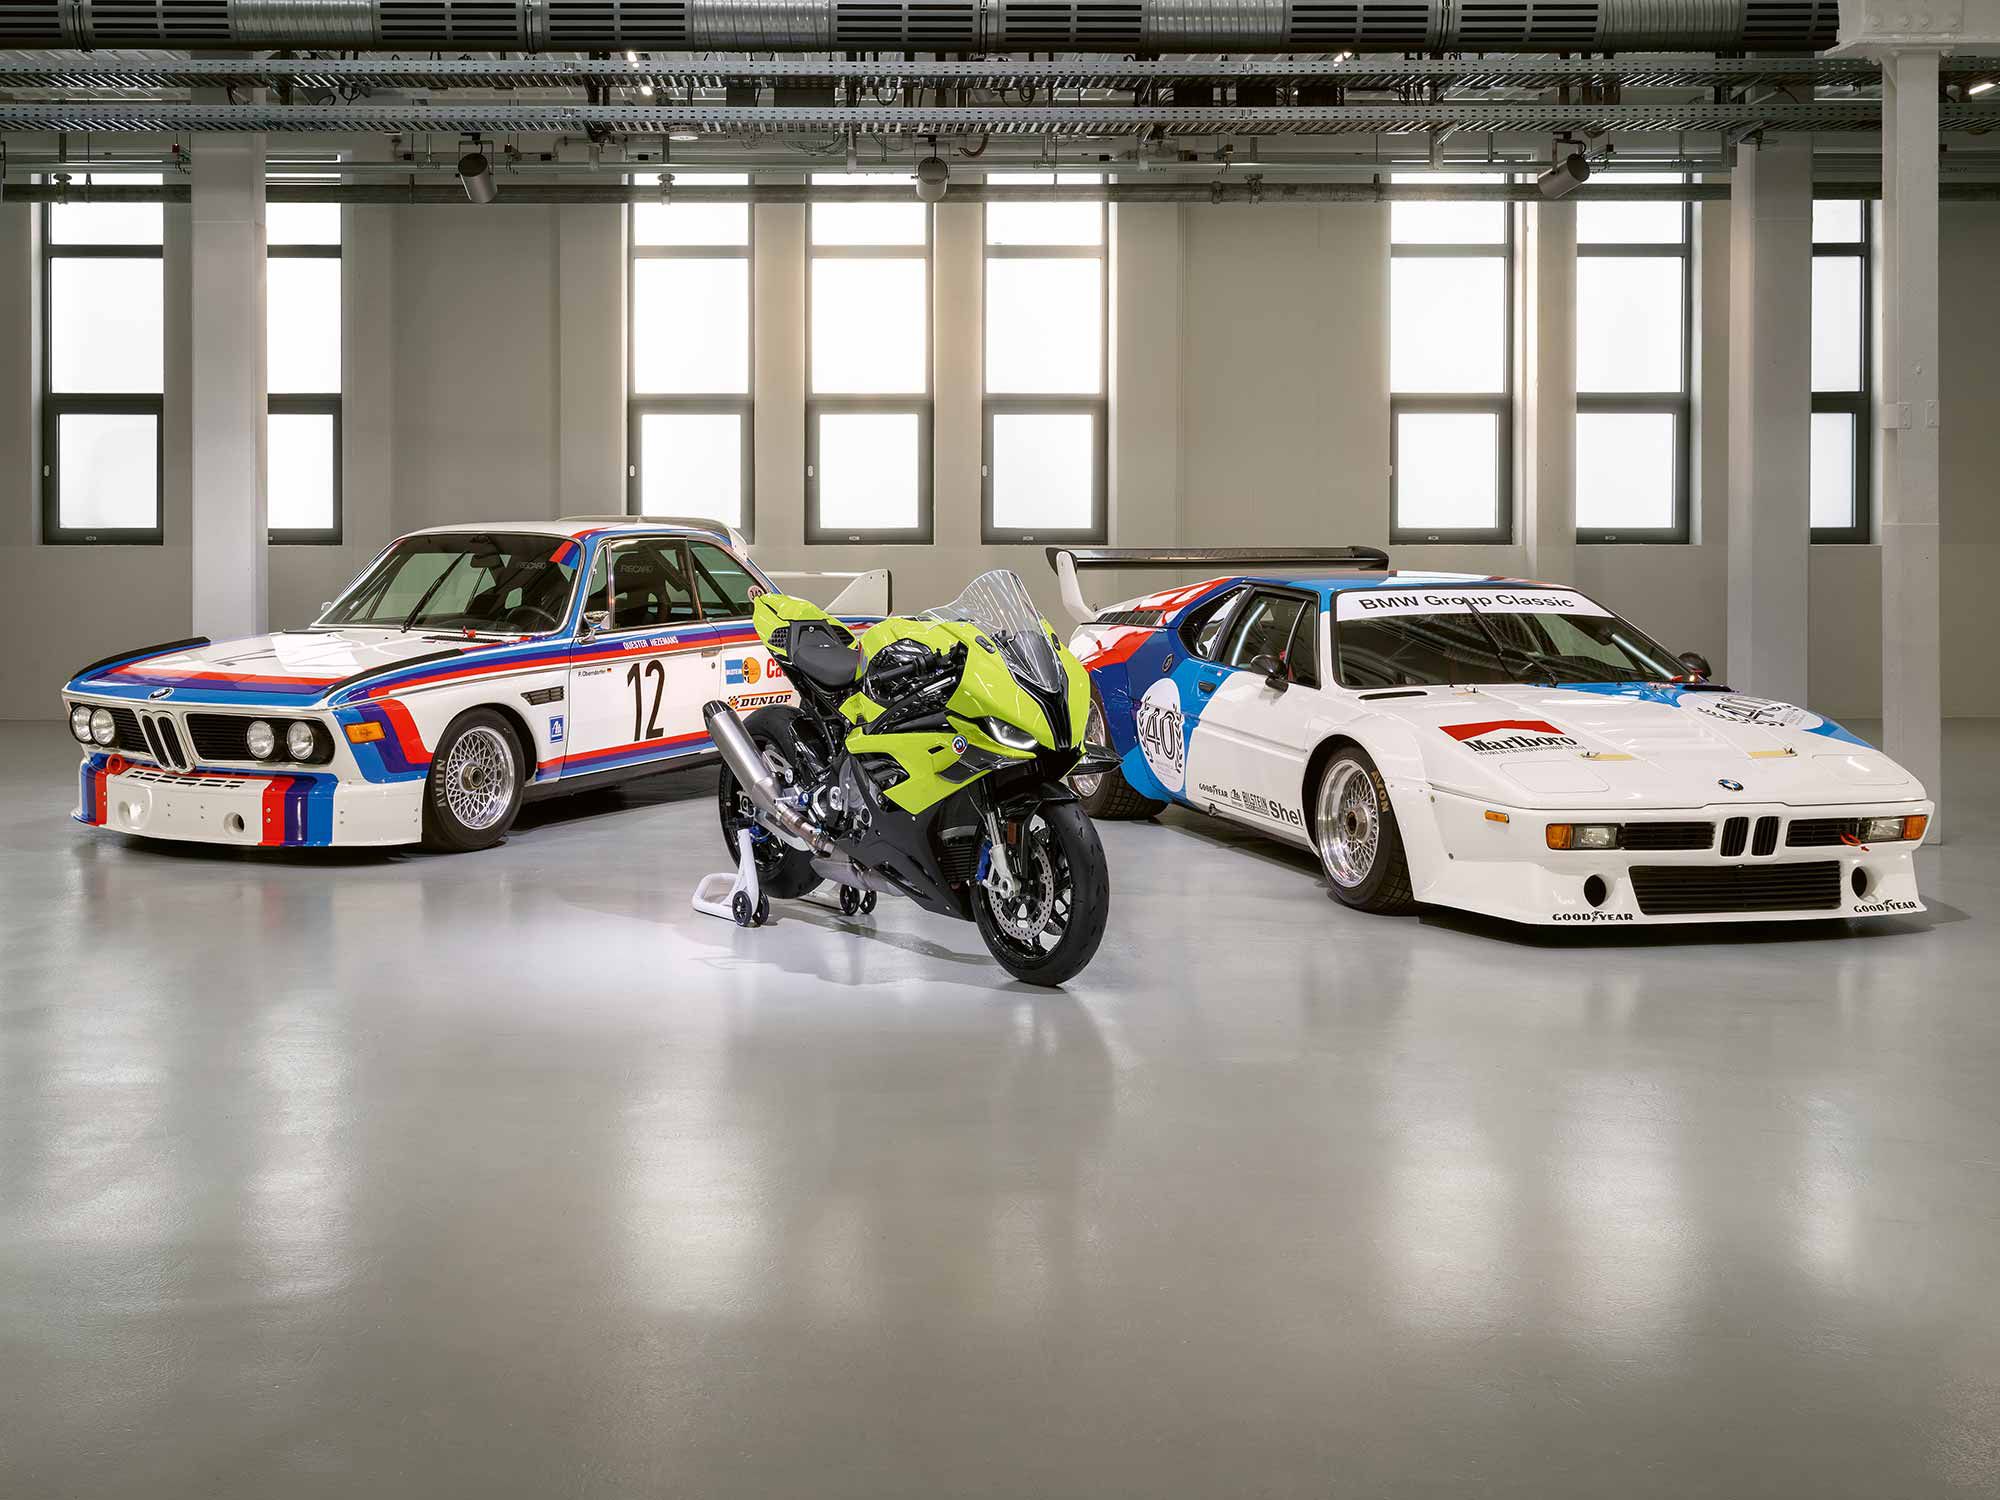 The M RR 50 Years M Anniversary model, with the legendary BMW 3.0 CSL and M1 Procar.